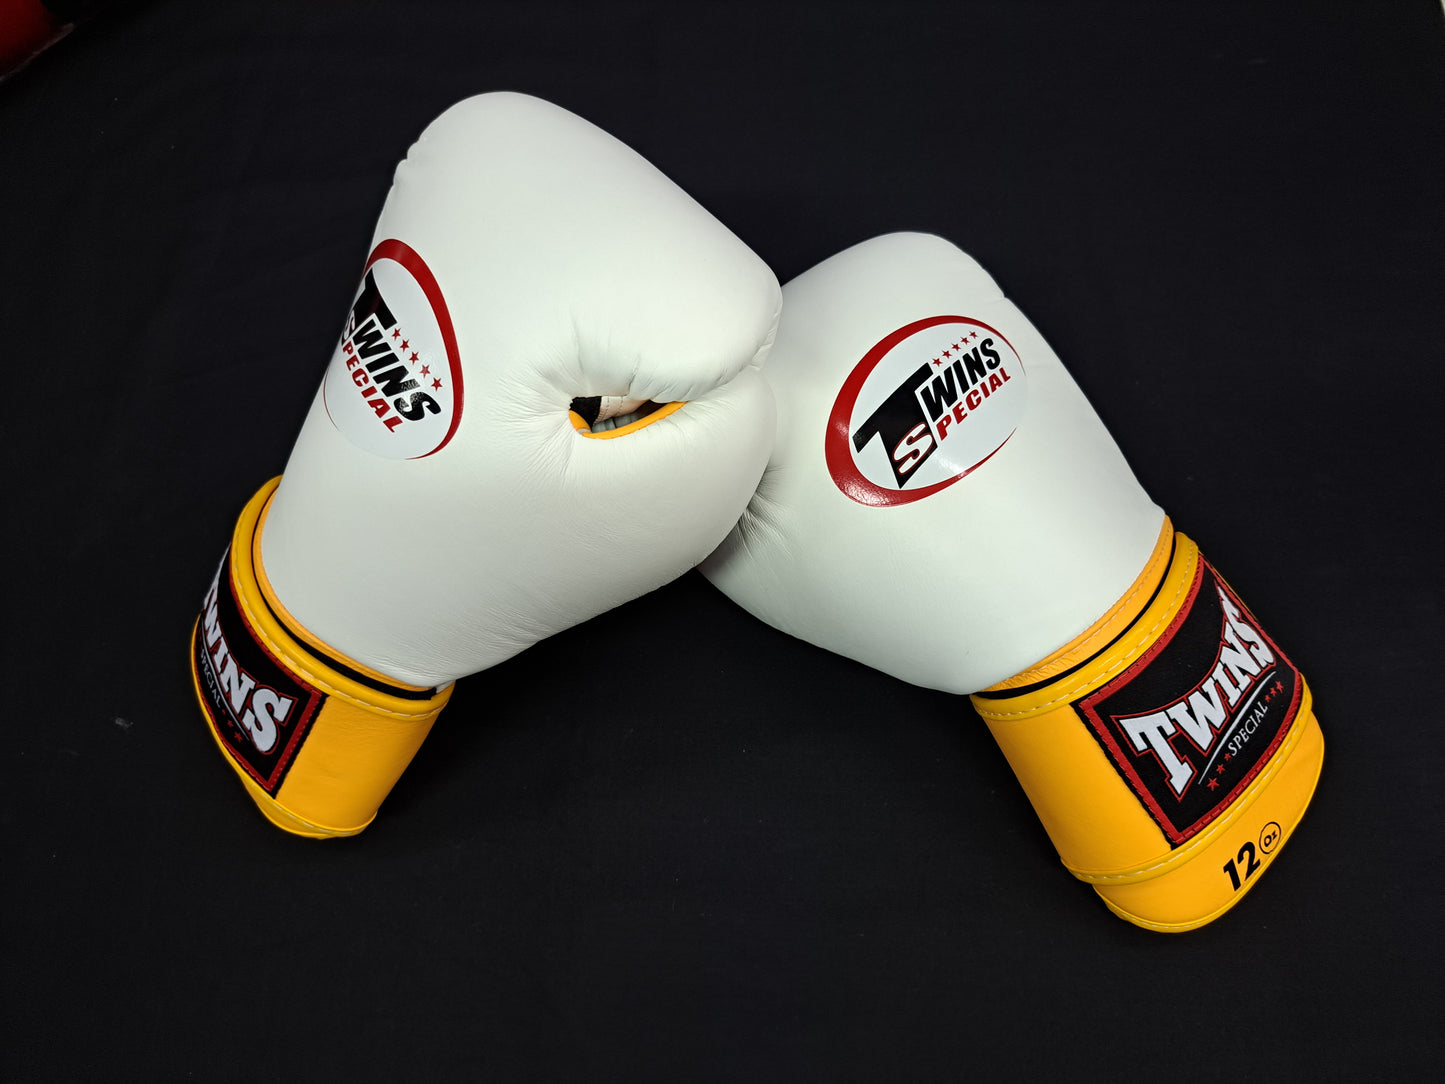 Twins Special "King"style thai boxing gloves